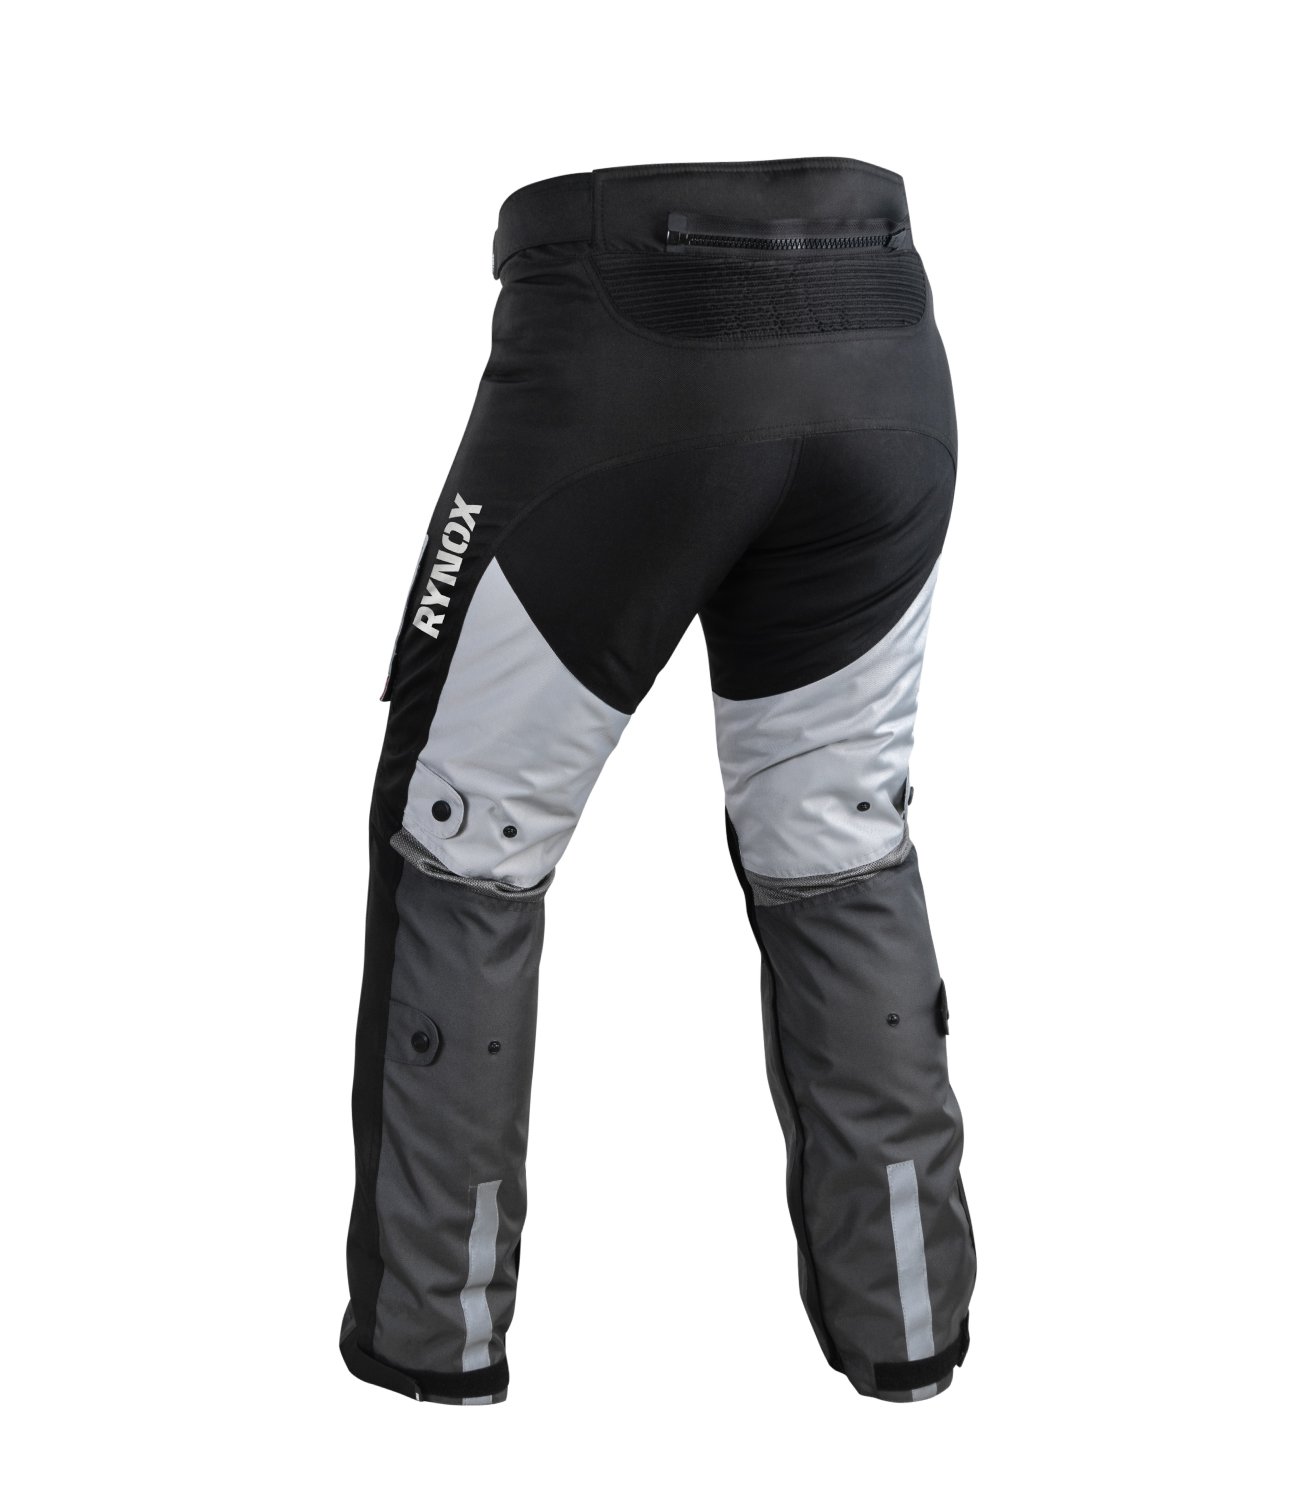 Safety Riding pants from Rynox, designed with advanced features for your  every ride. Shop at Bandidospitstop.com . . Call or Whats… | Riding pants,  Shopping, Duffle